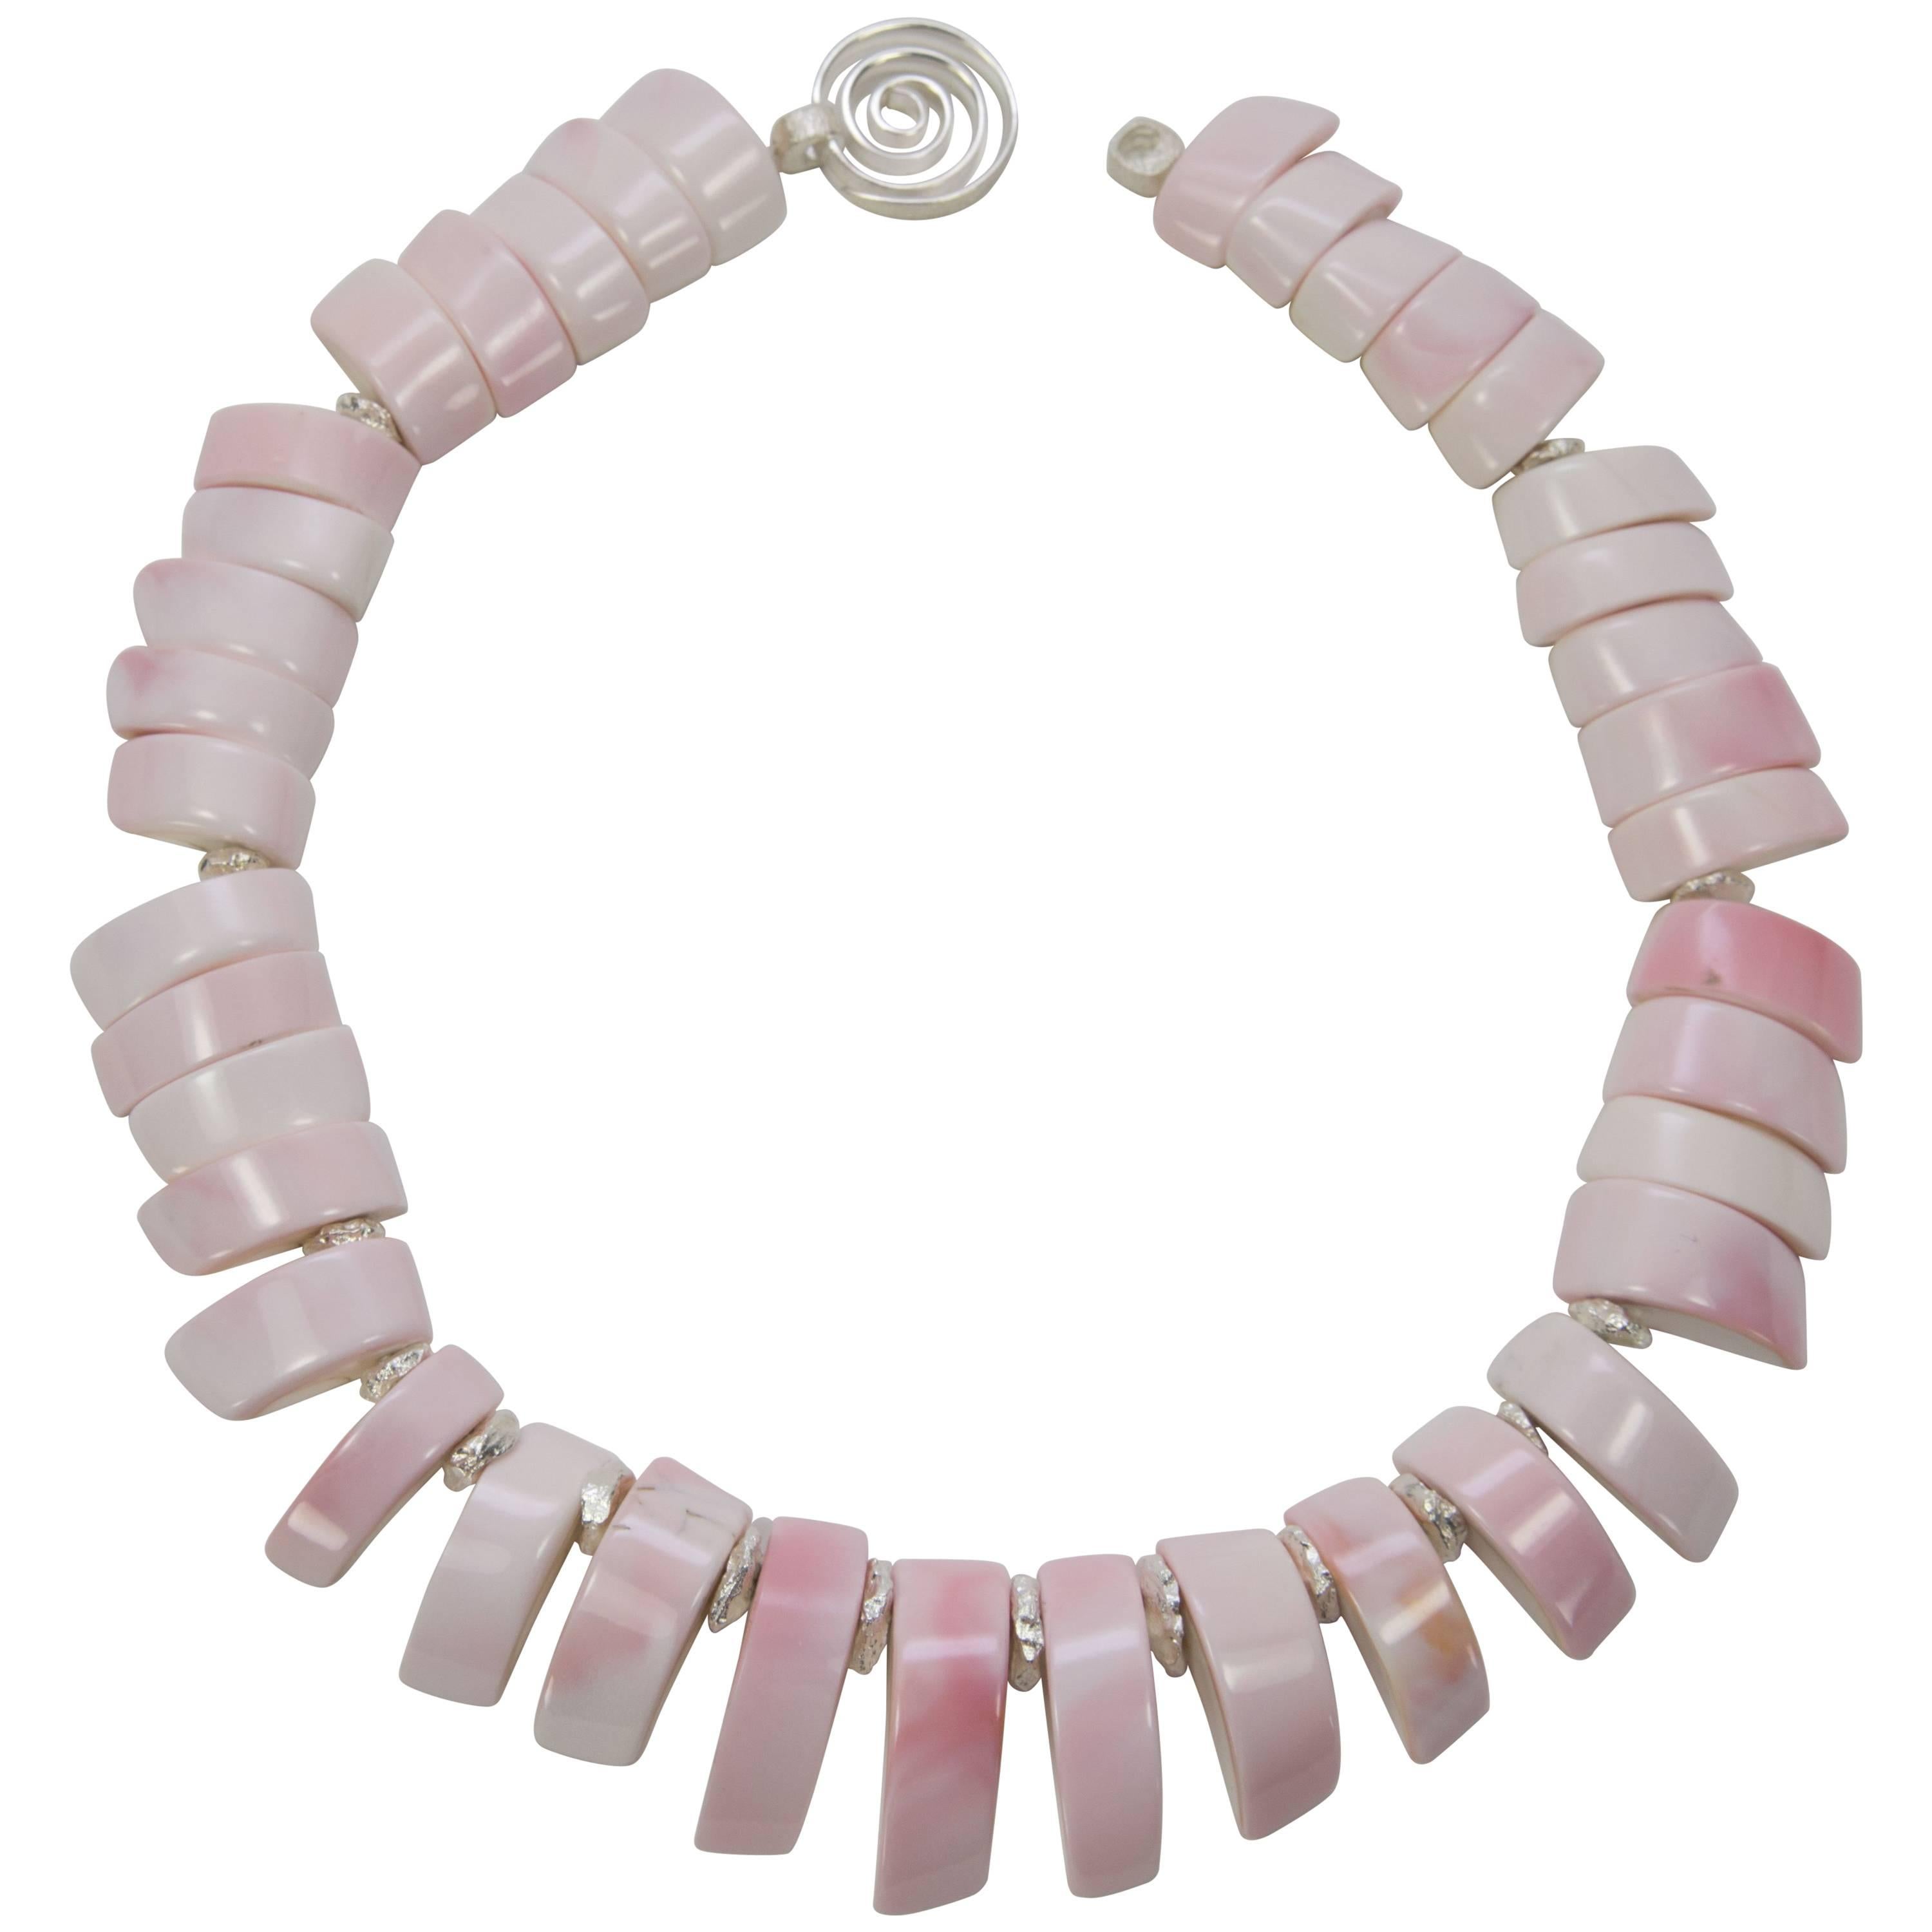 Awesome Blush Pink Conch Shell Statement Necklace For Sale